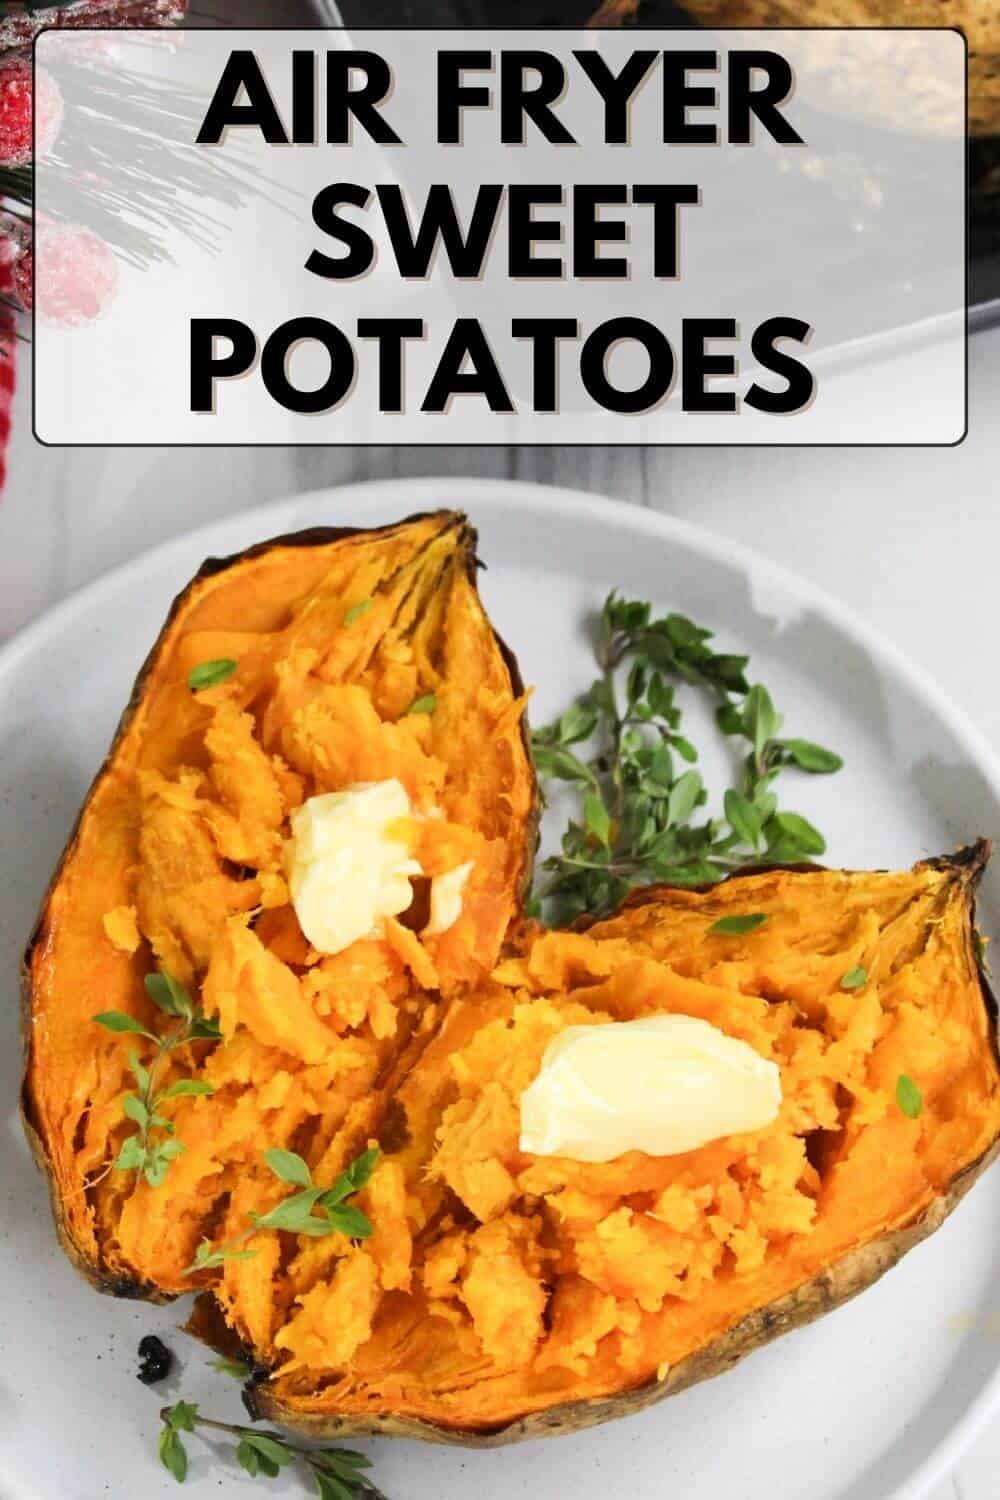 Air fryer sweet potatoes with butter on a plate.